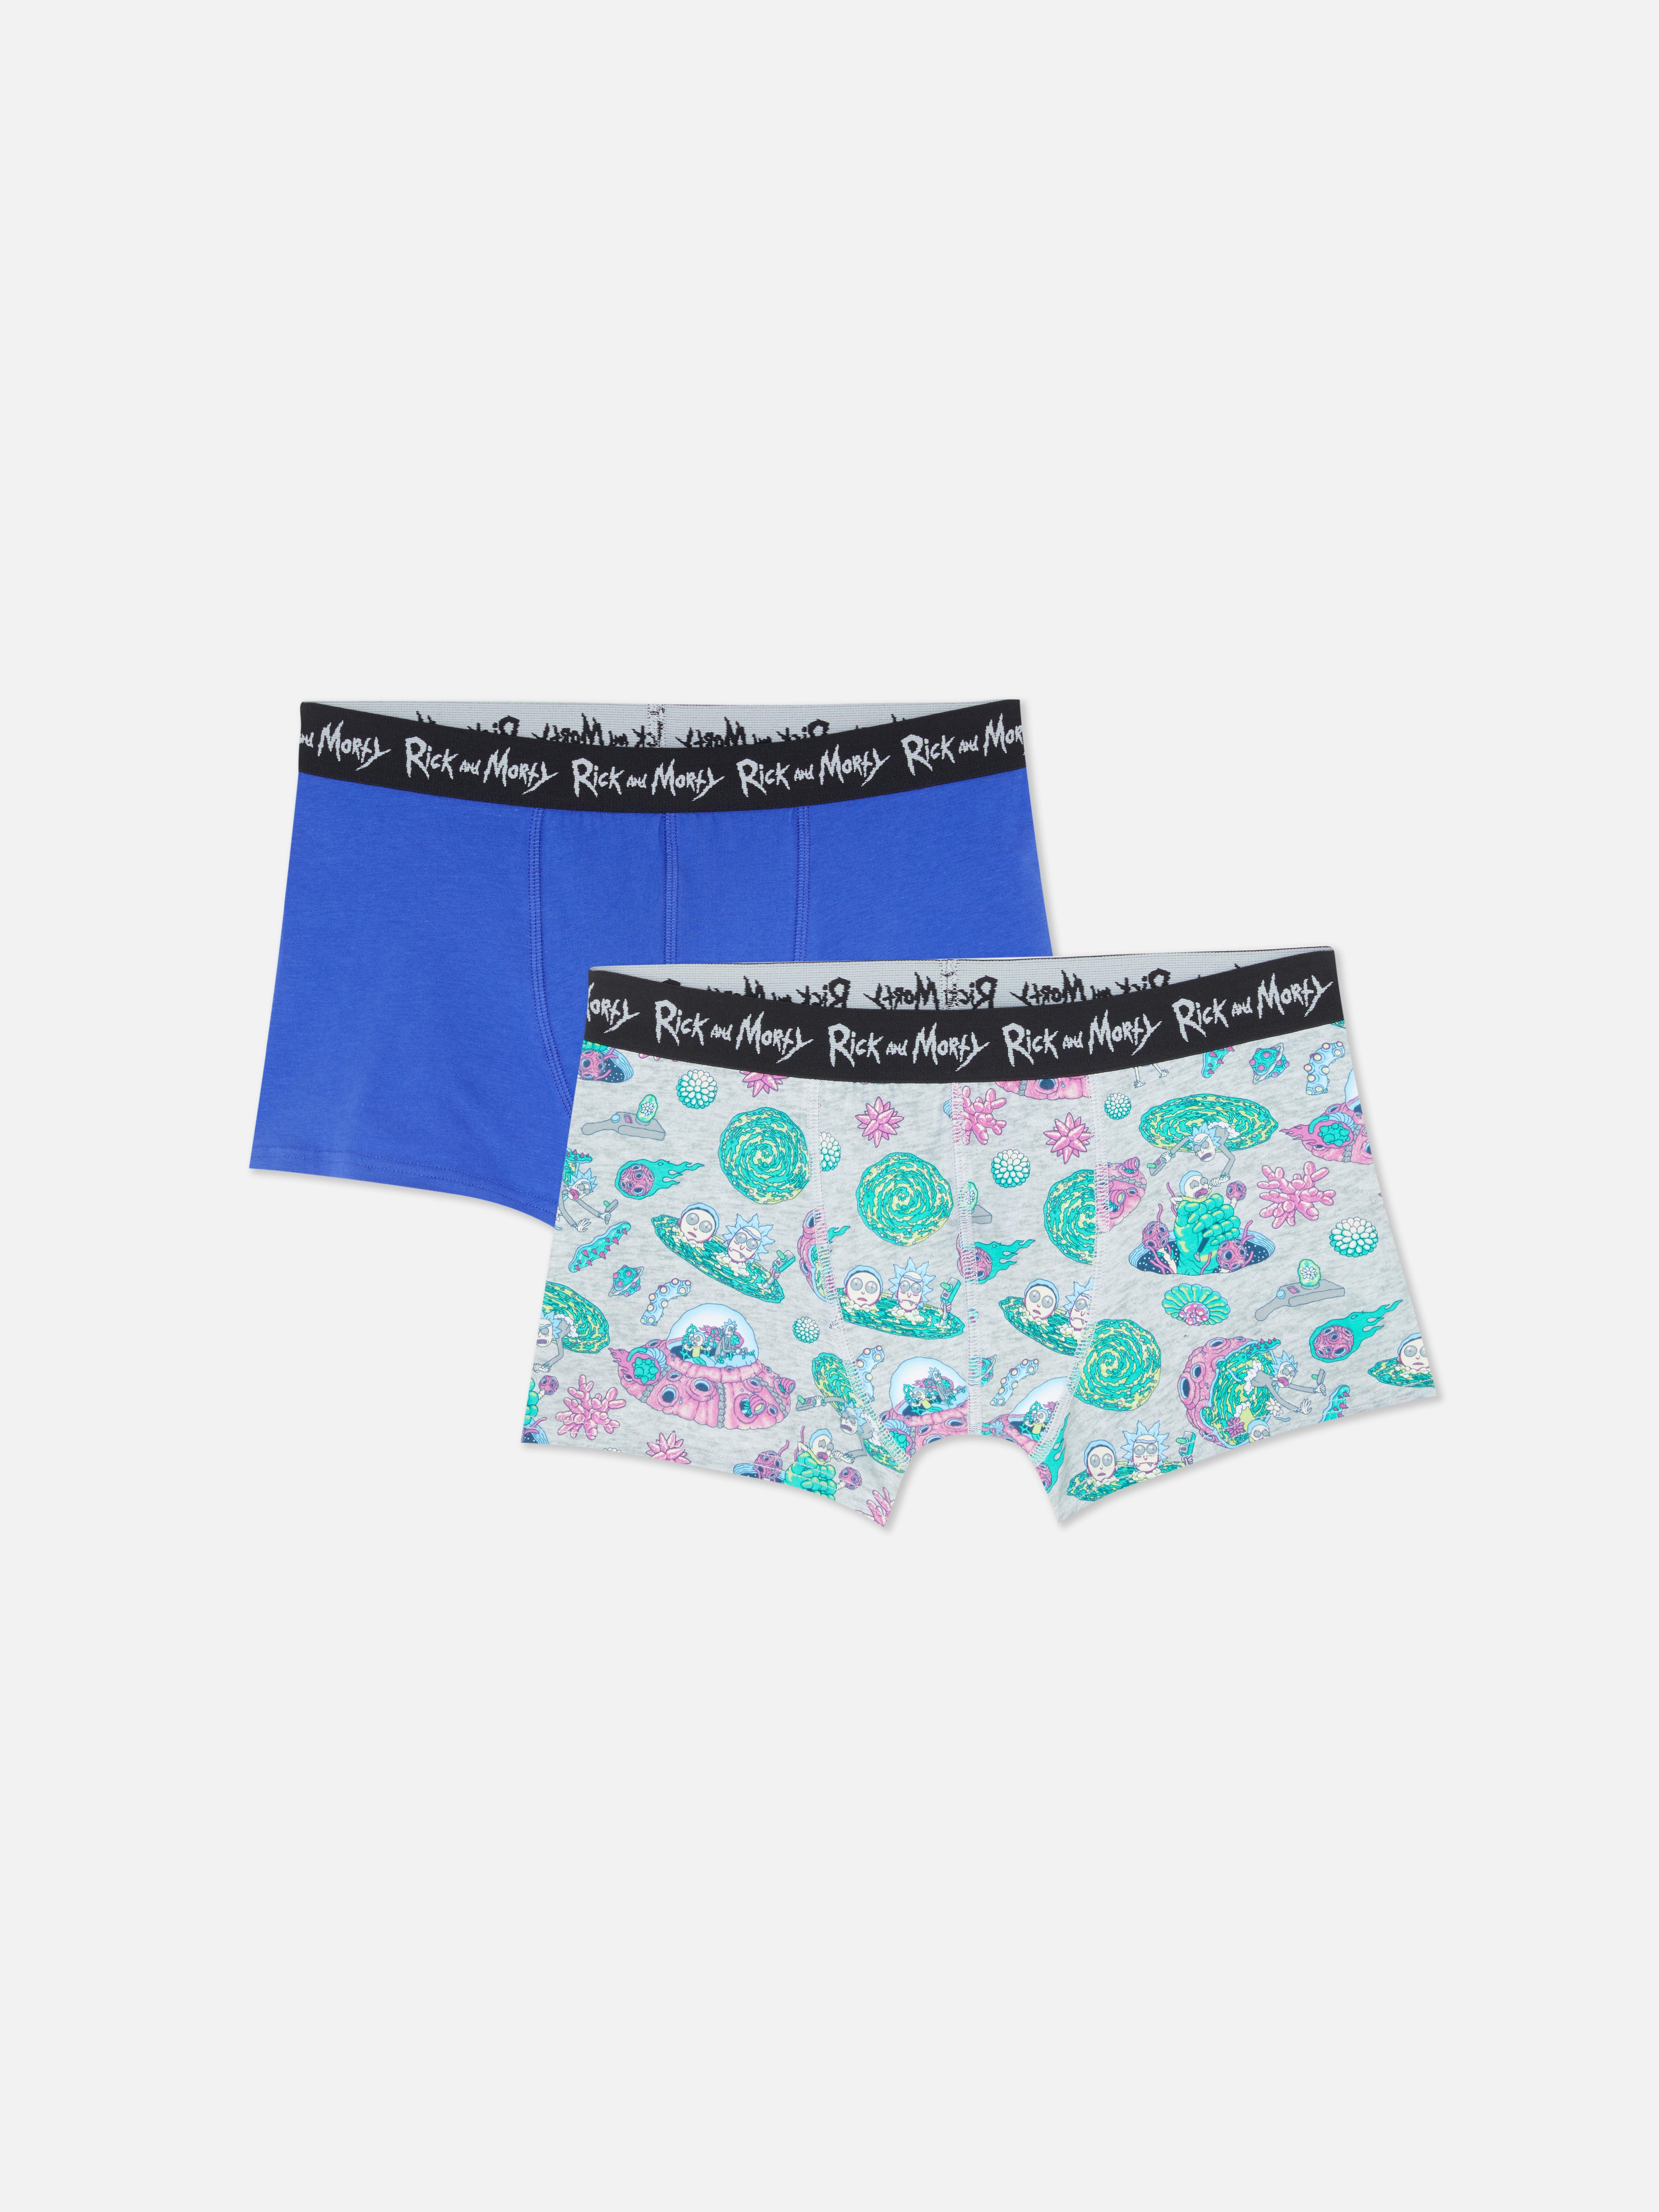 2pk Rick and Morty Boxers